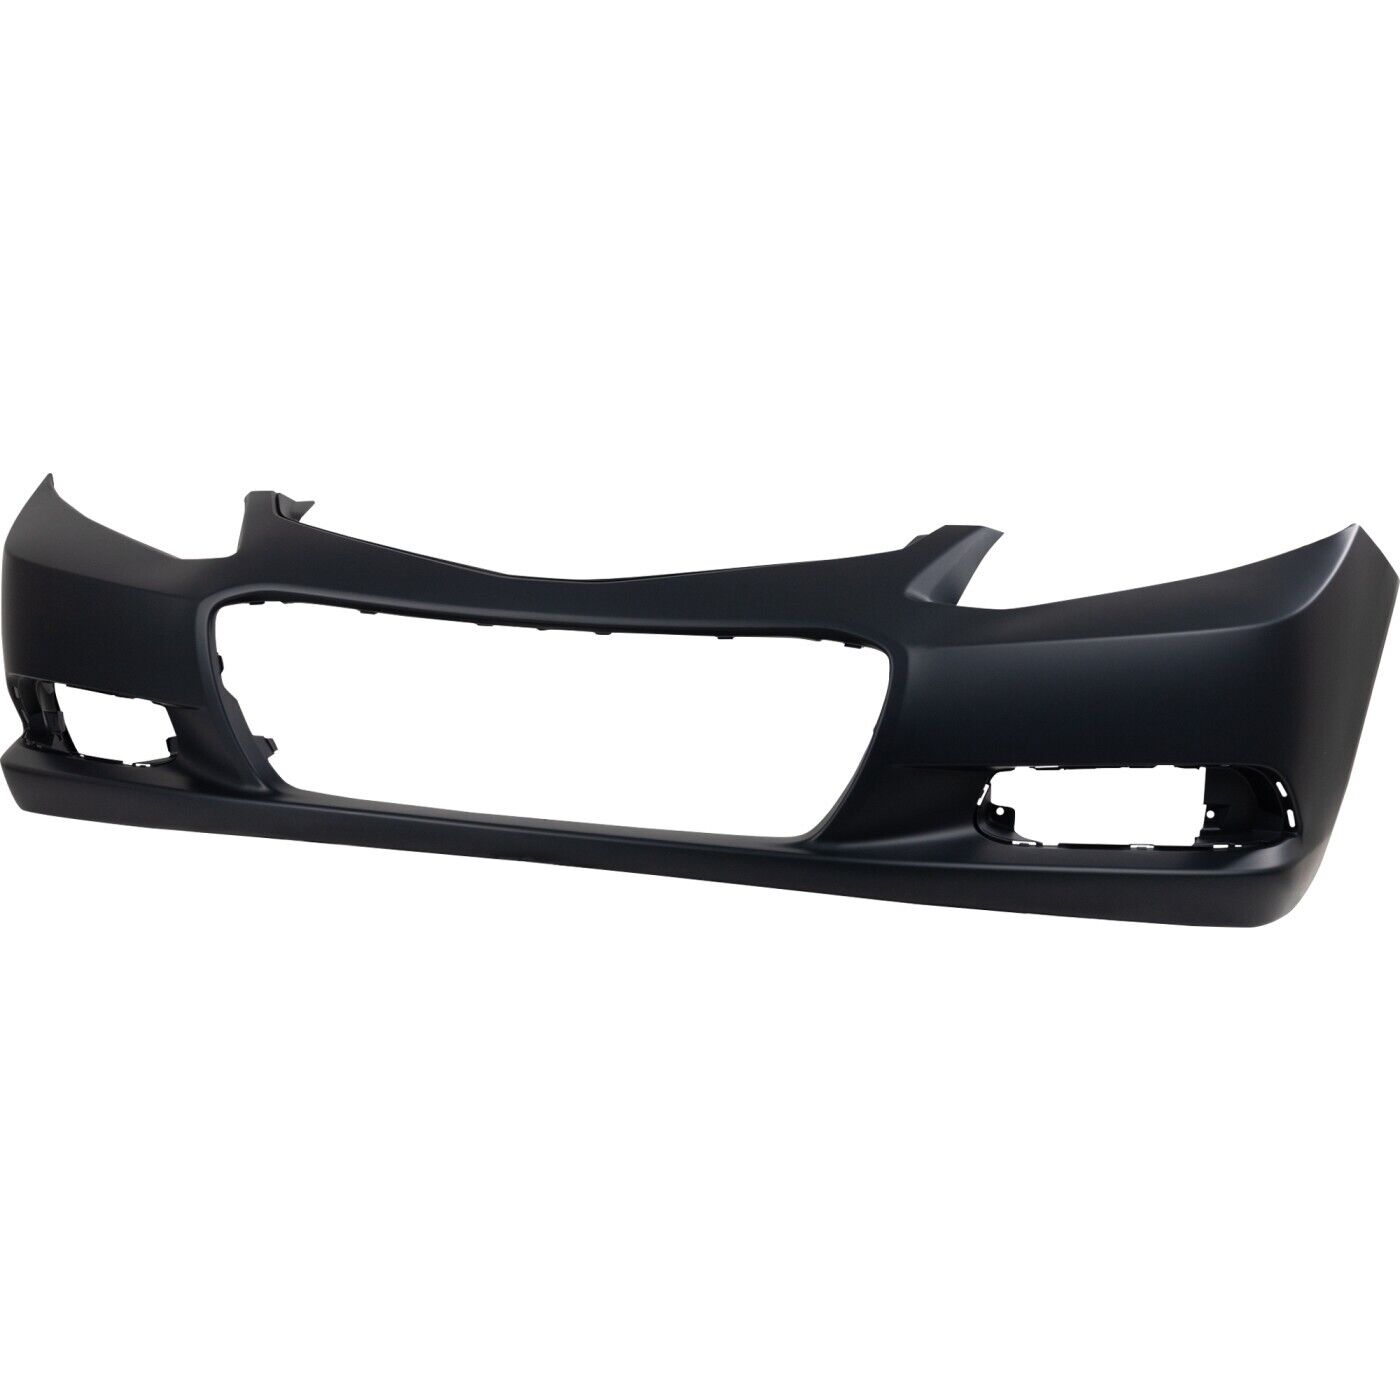 Front Bumper Cover For 2012-2013 Honda Civic Coupe w/ fog lamp holes Primed